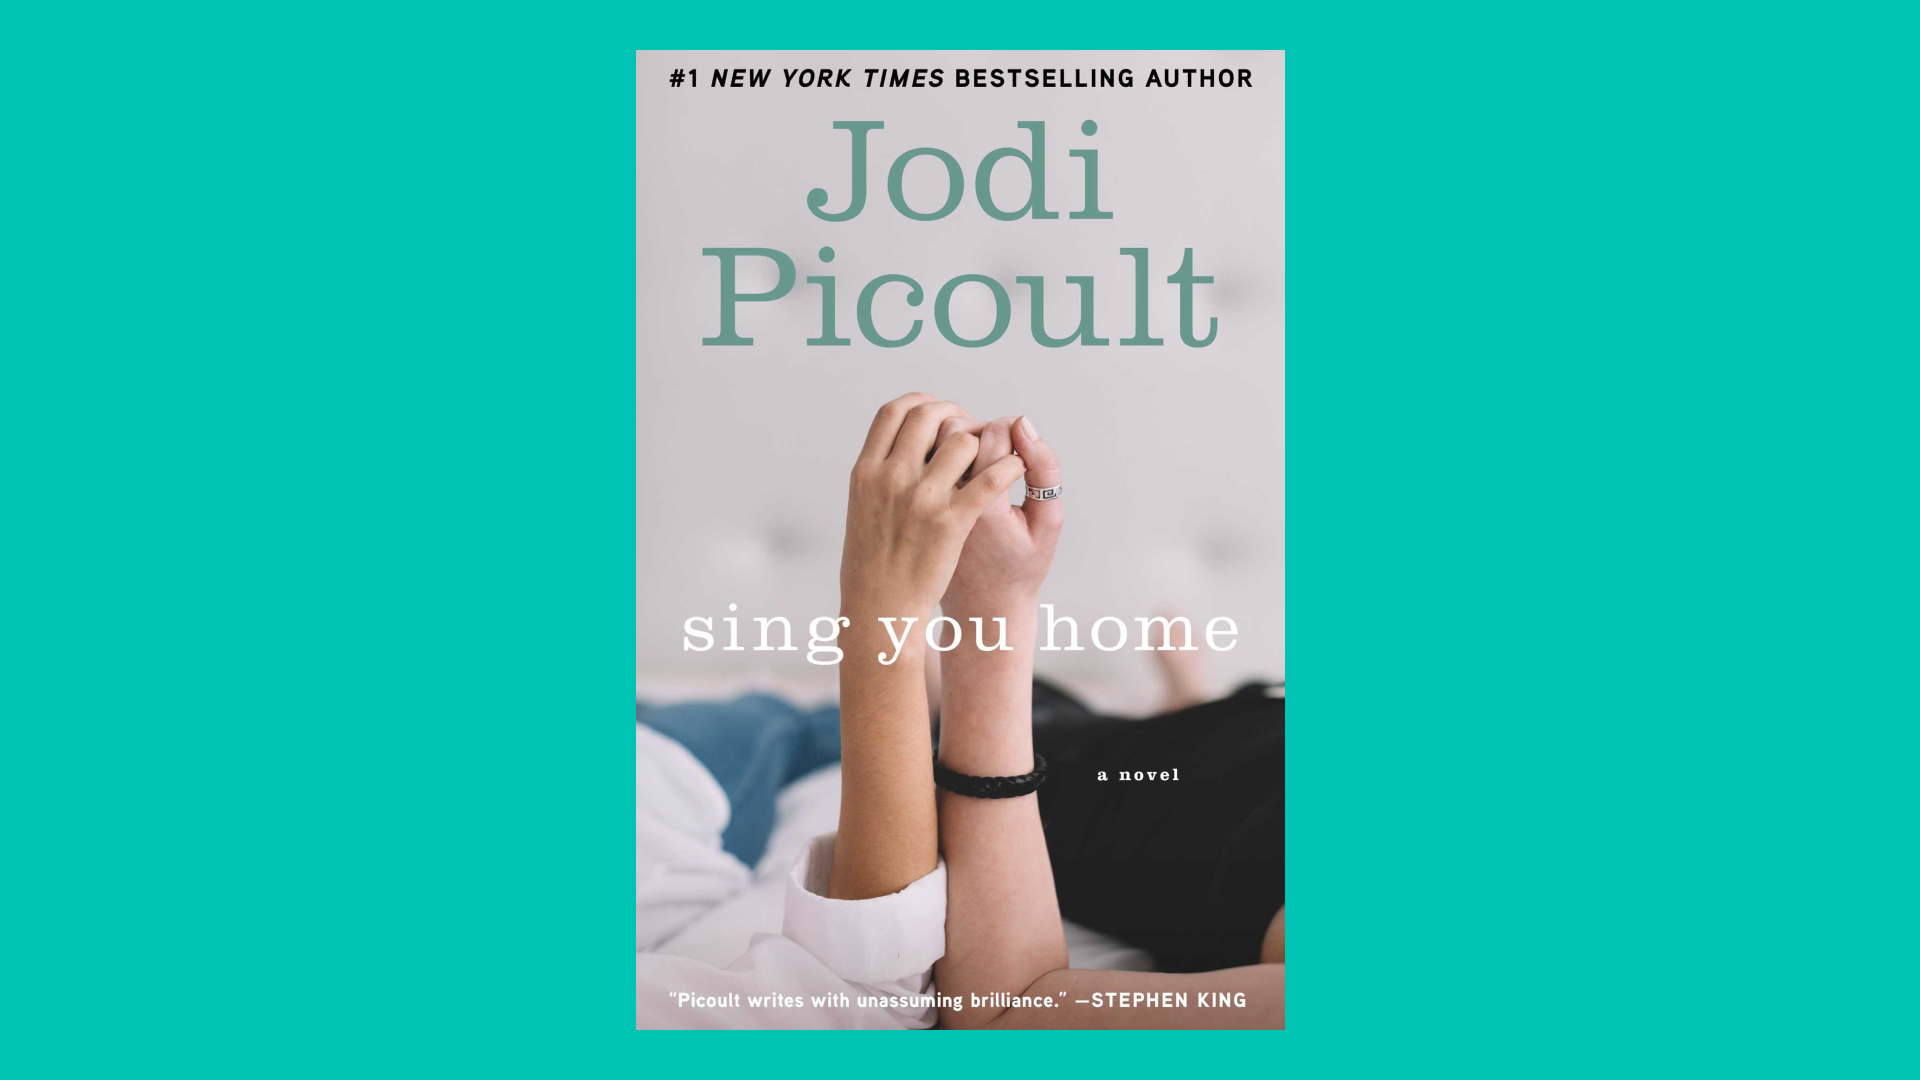 “Sing You Home” by Jodi Picoult 